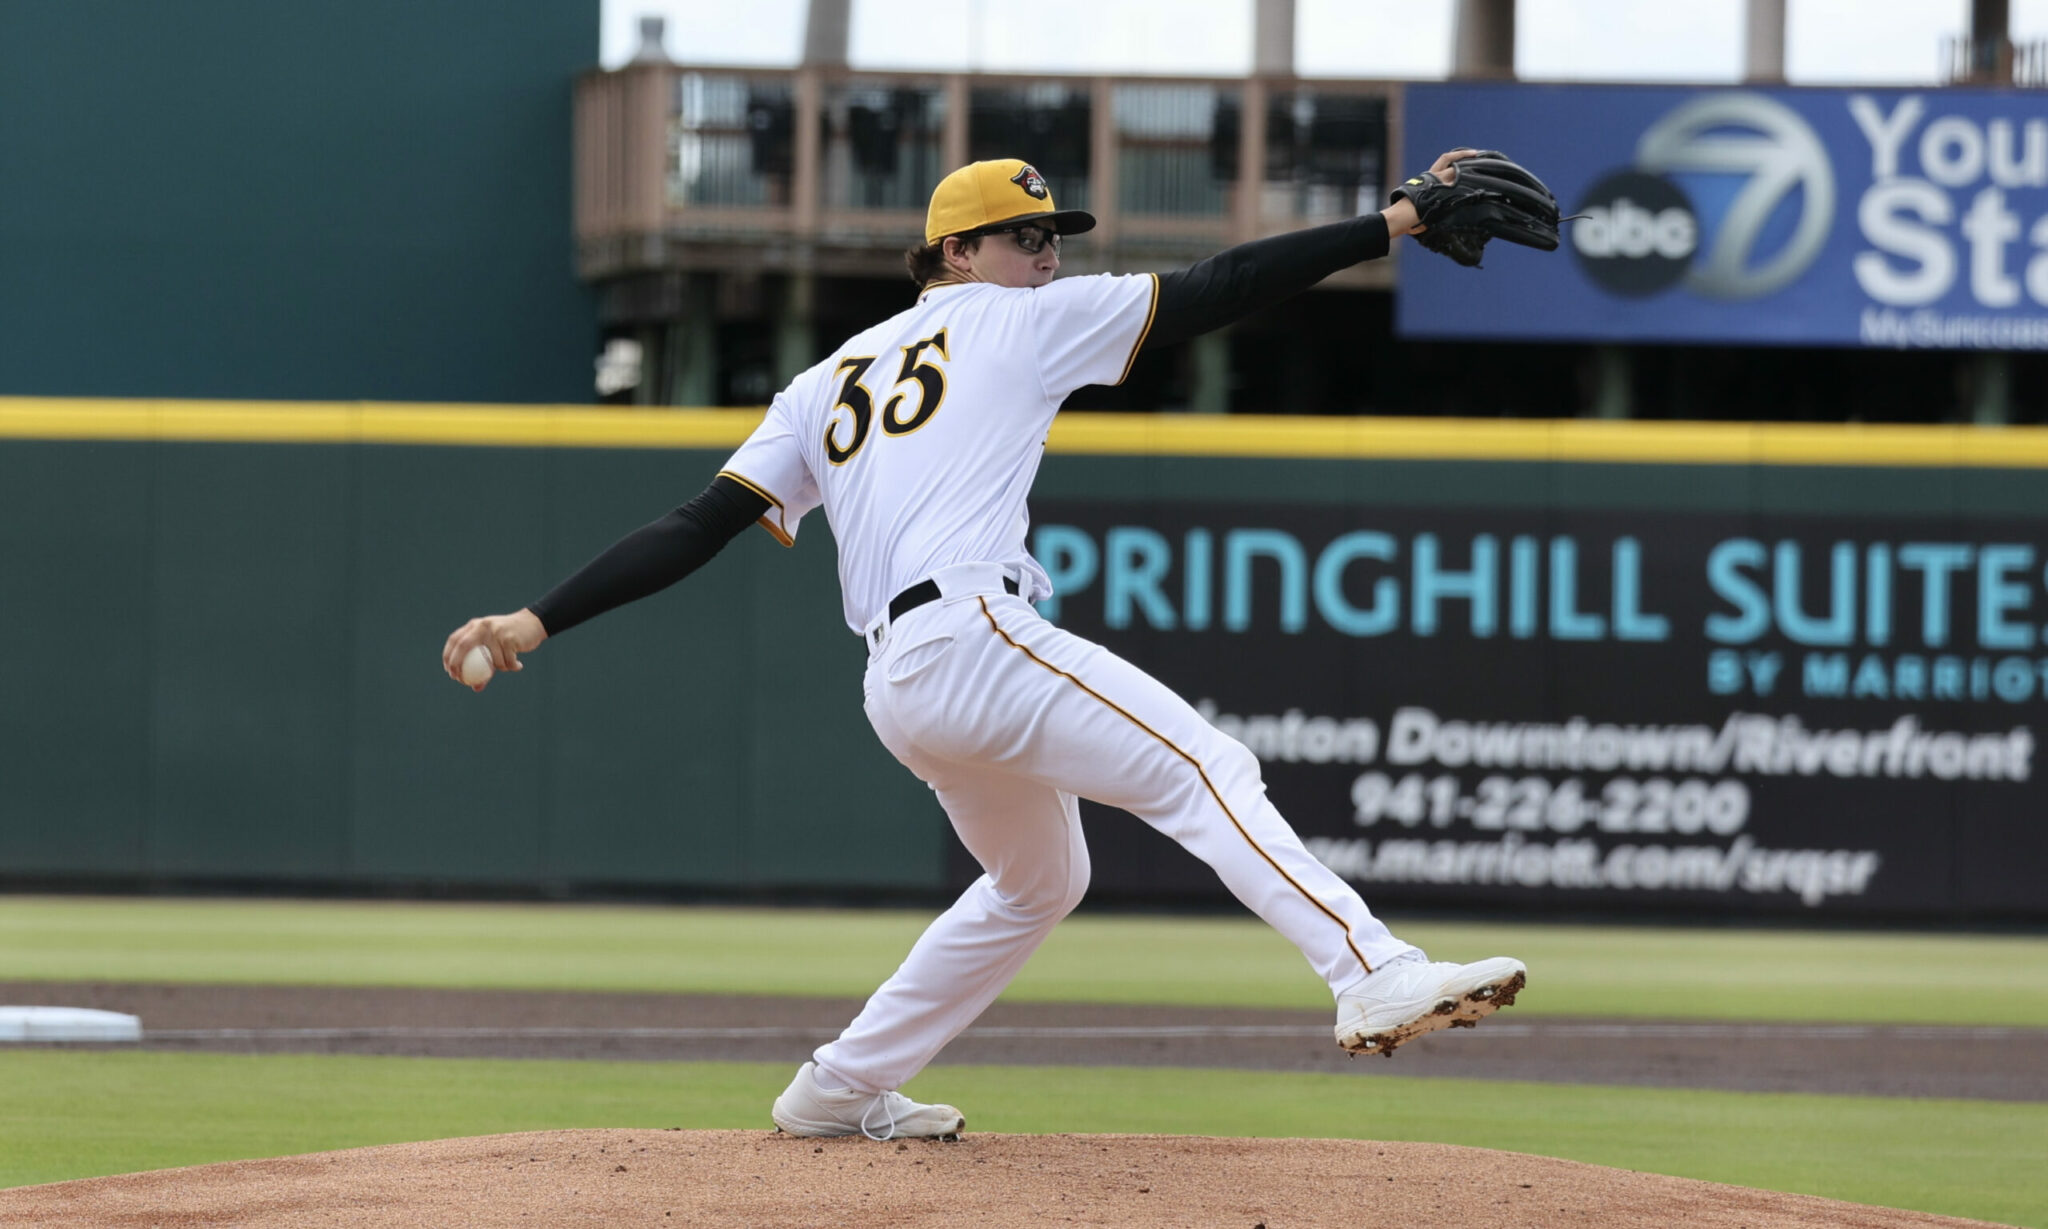 Anthony Solometo: Lefty Showed Great Approach In First Professional Season